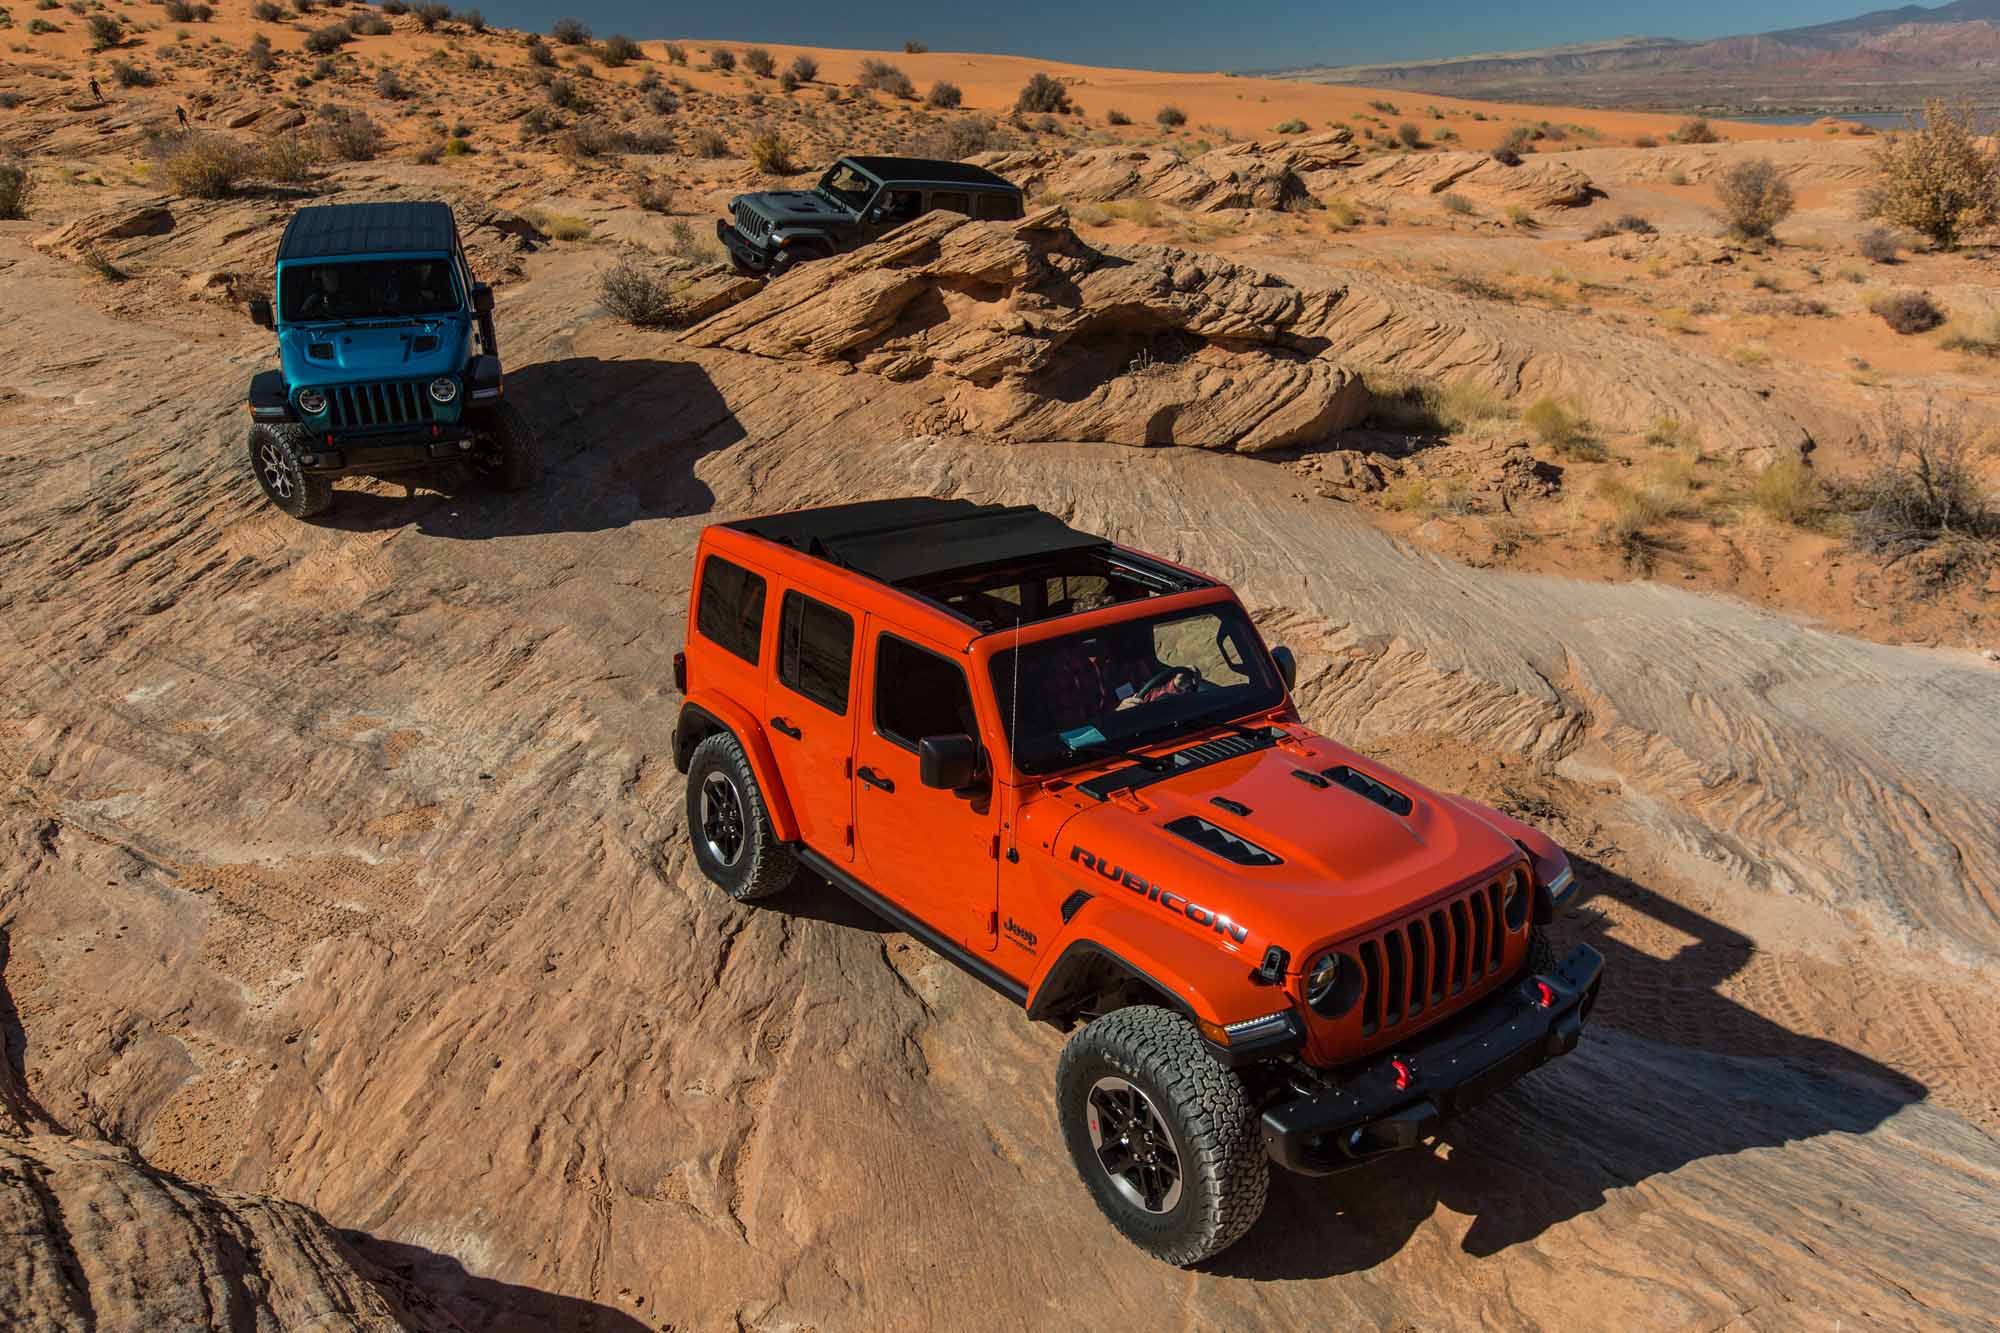 First Drive: The Jeep Wrangler JL EcoDiesel - The Dirt by 4WP